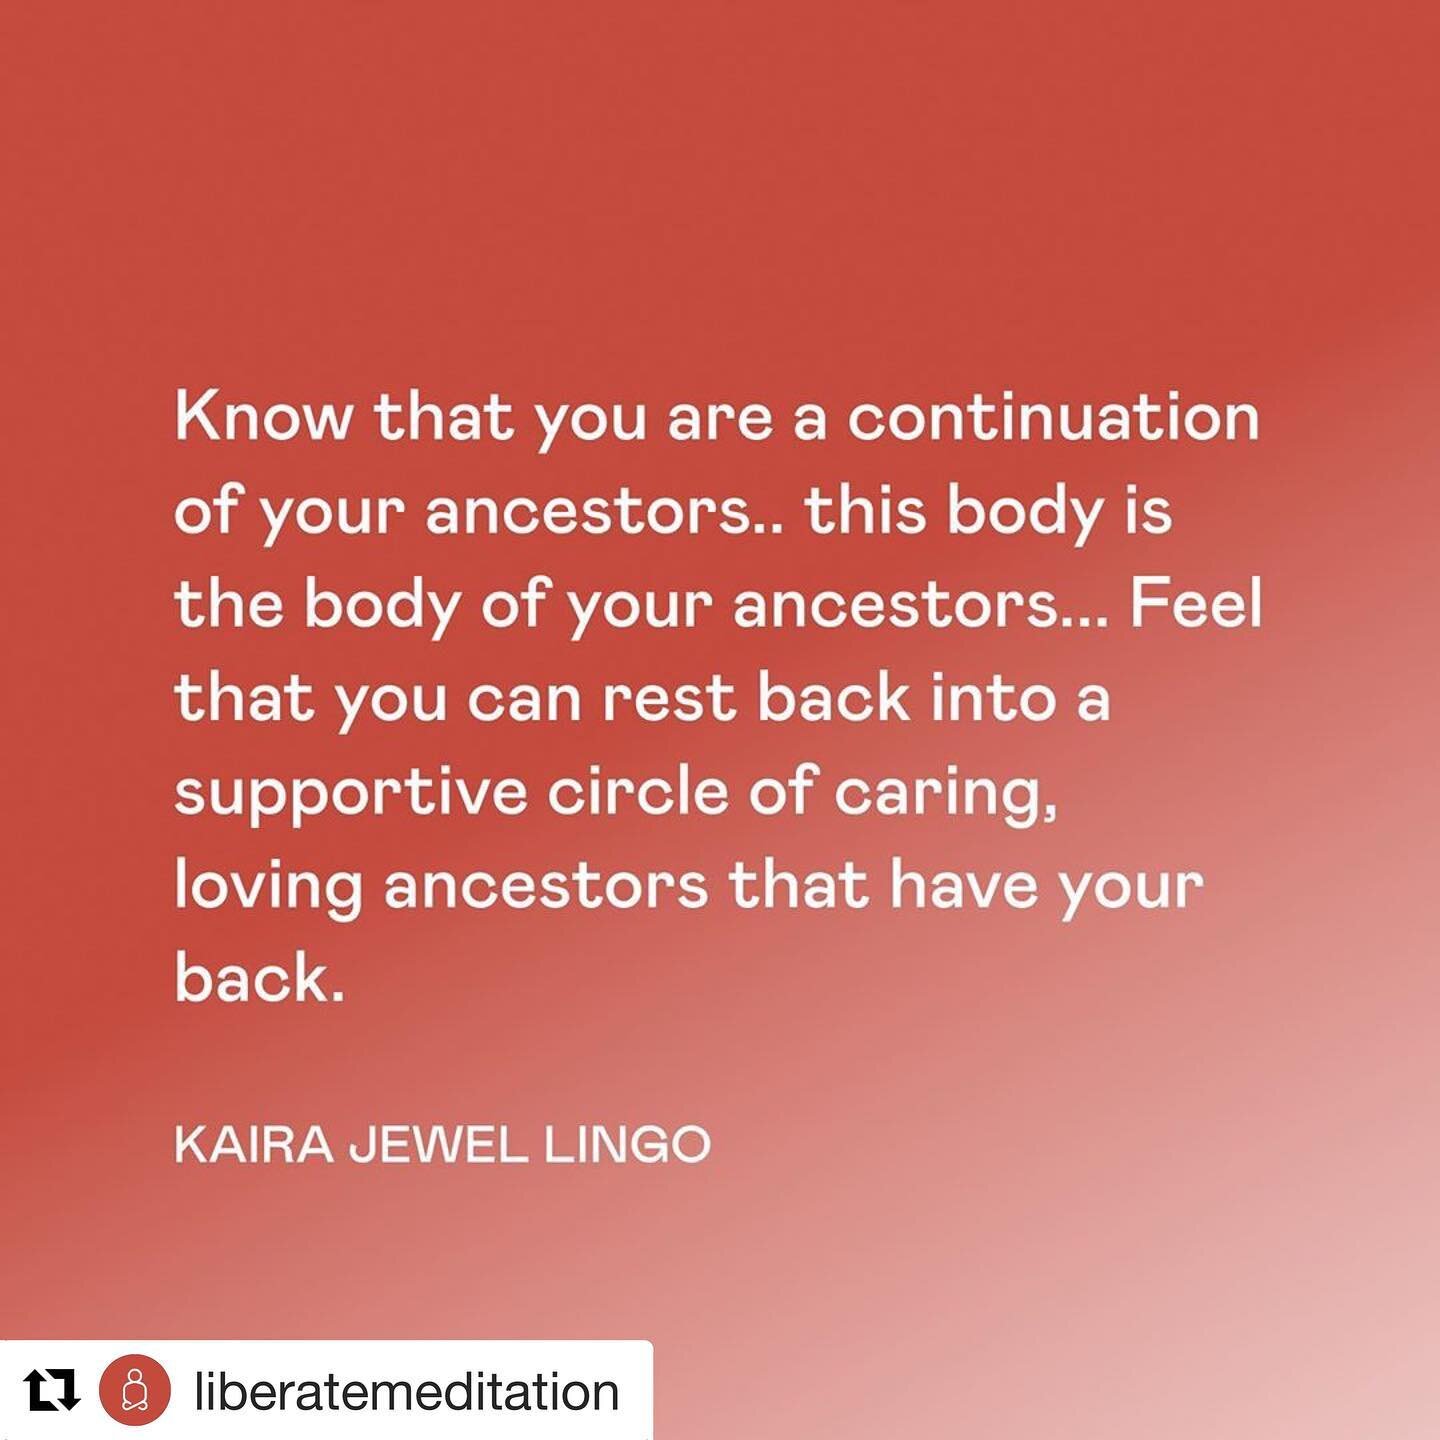 #Repost @liberatemeditation with @get_repost
・・・
&ldquo;For the Ancestor In You&rdquo; by Kaira Jewel Lingo is a new meditation we put up in our Ancestor Category. There is opportunity to come back home to ourselves by tapping into the ancestral wisd